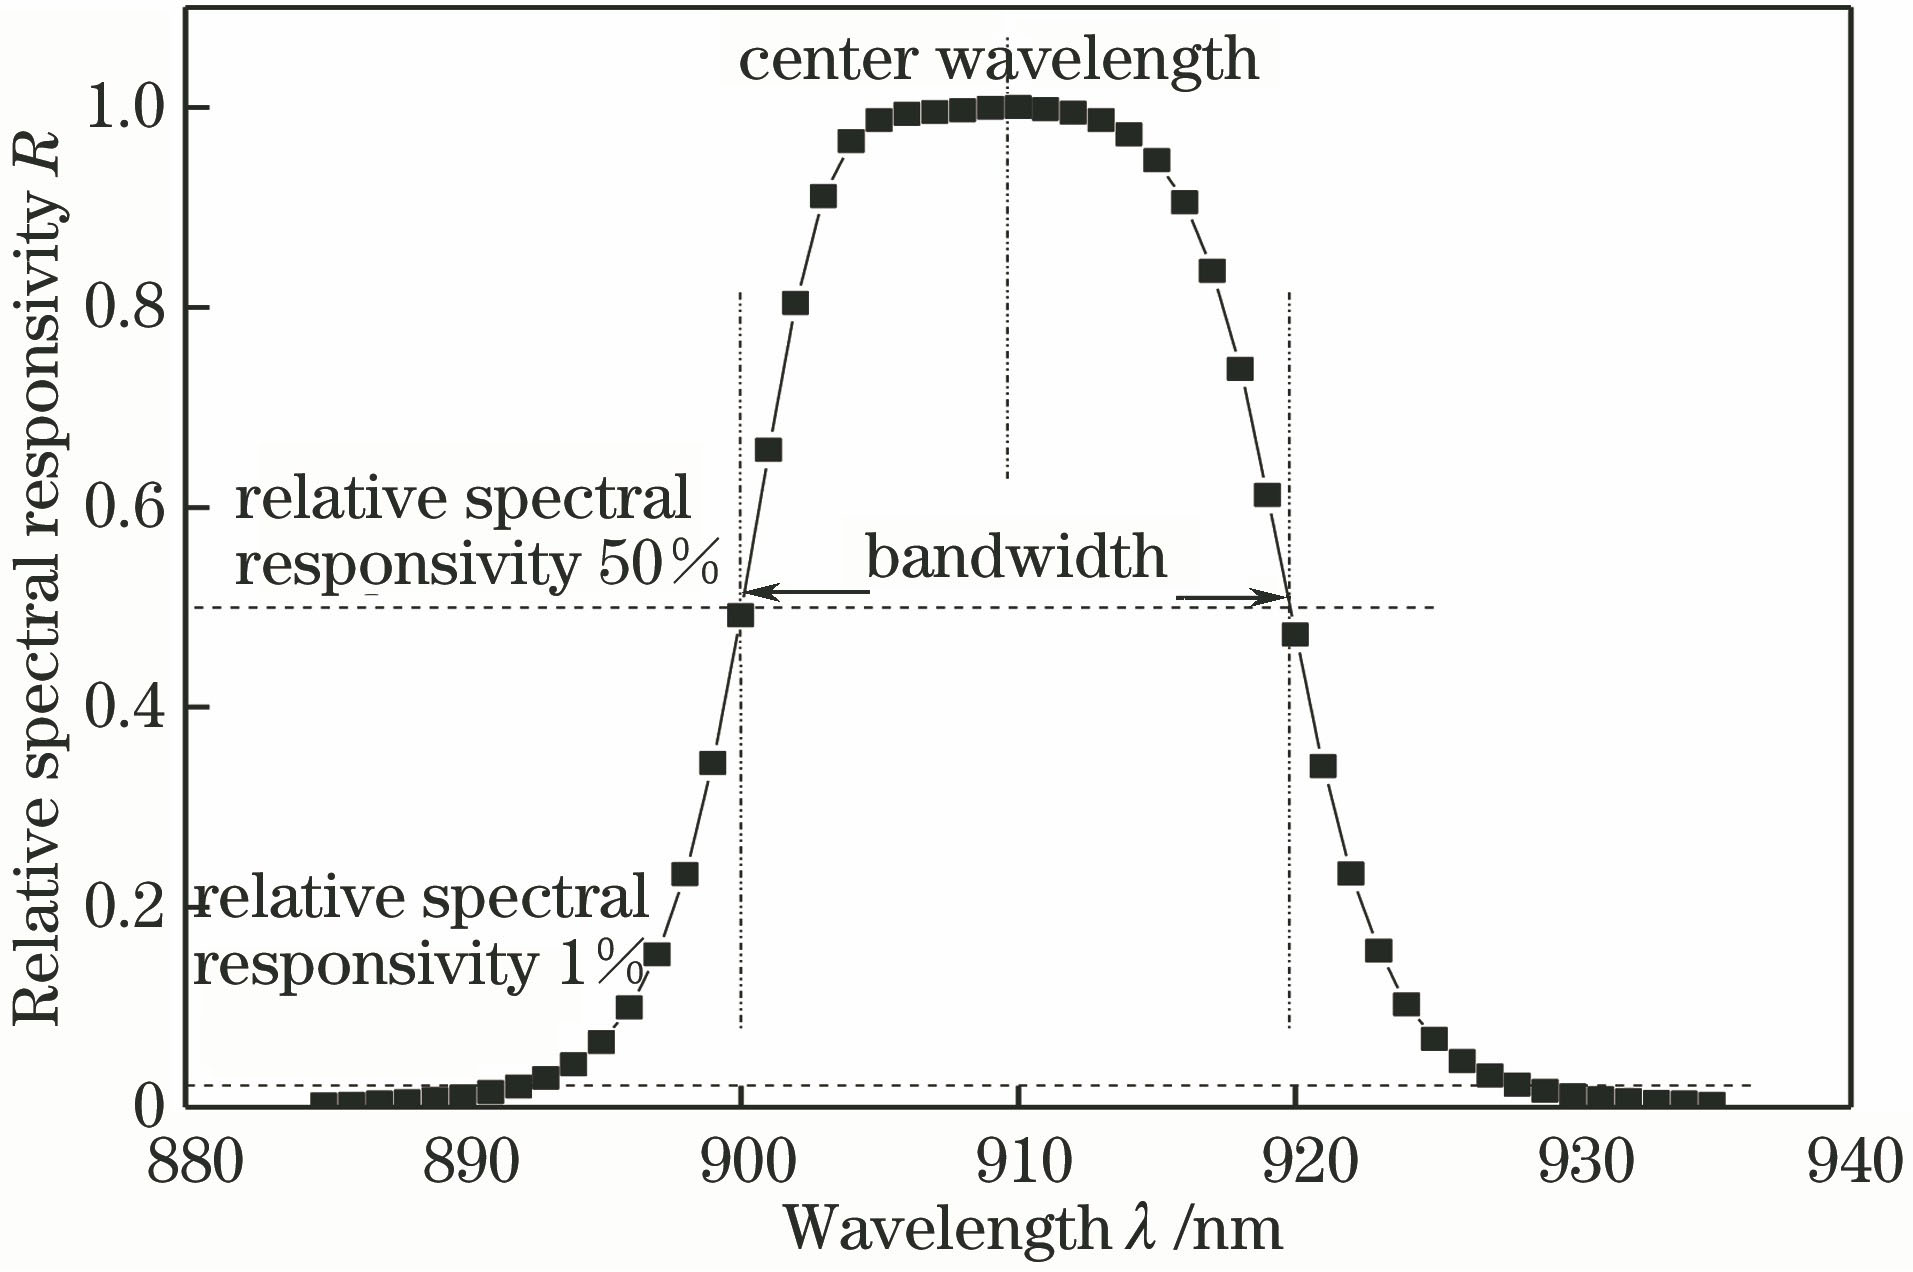 Definitions of in-band, center wavelength and spectral bandwidth